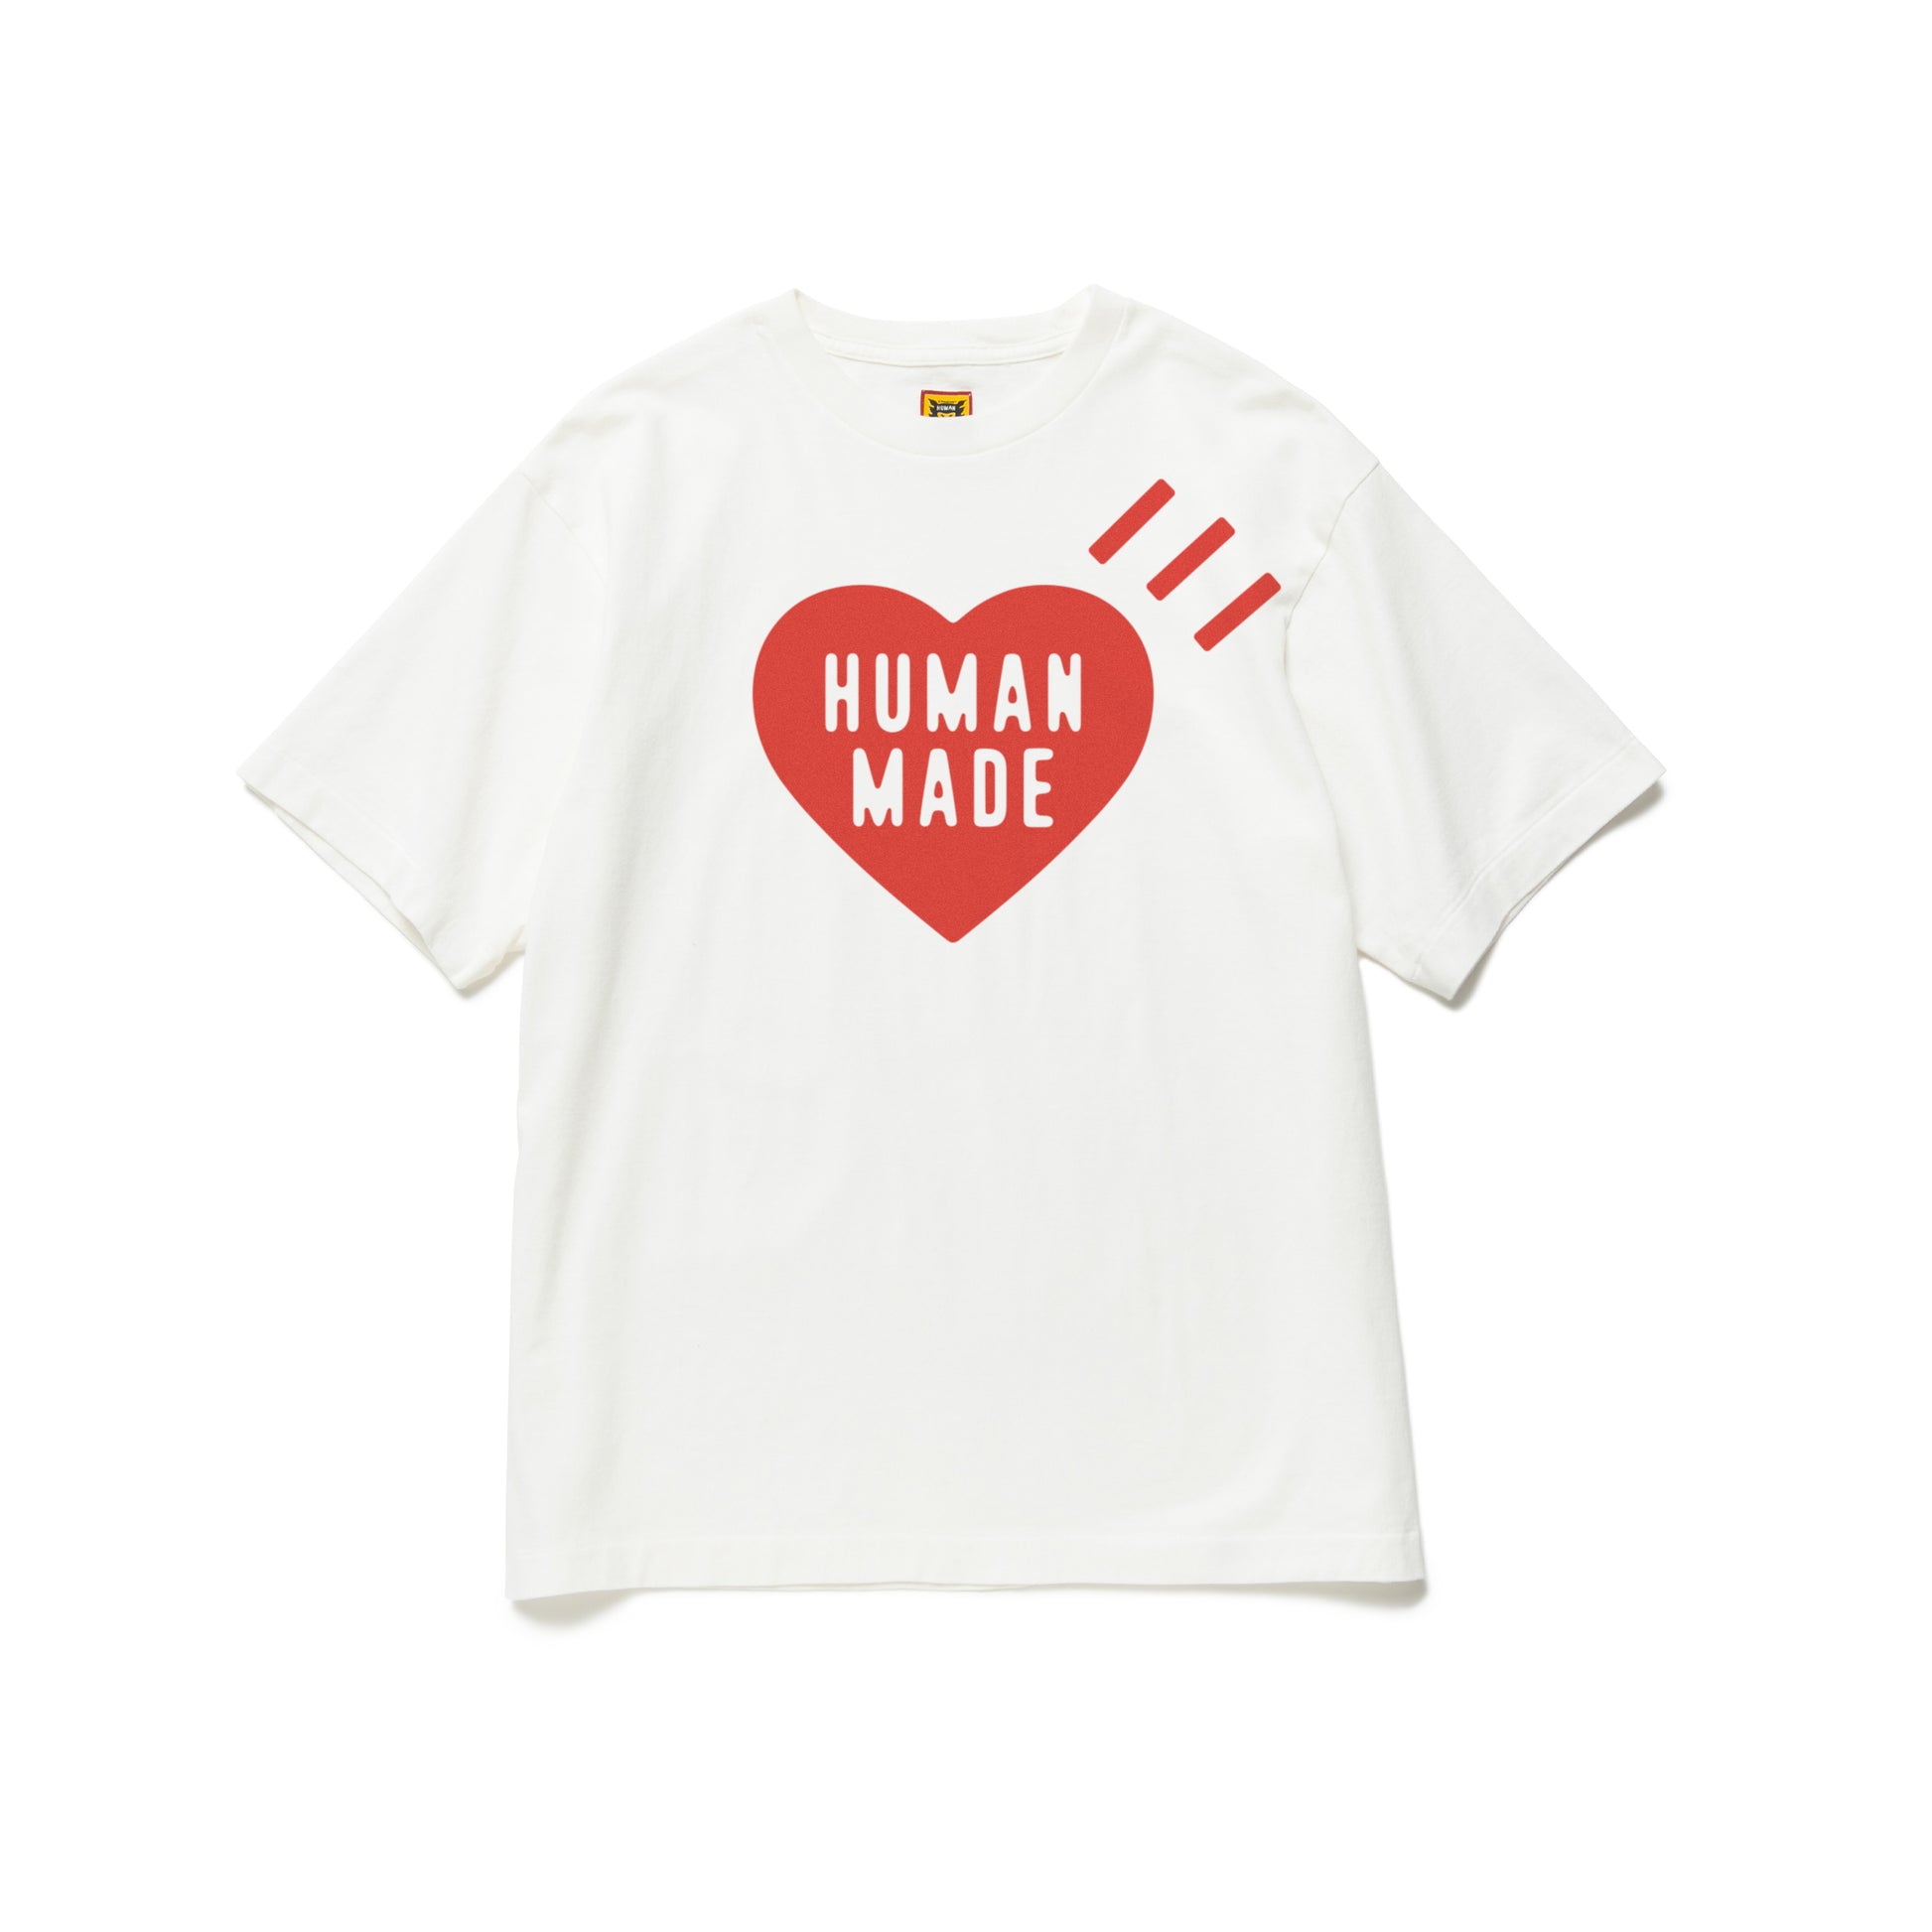 wasted youth Tシャツ 黒 Mサイズ human made購入品